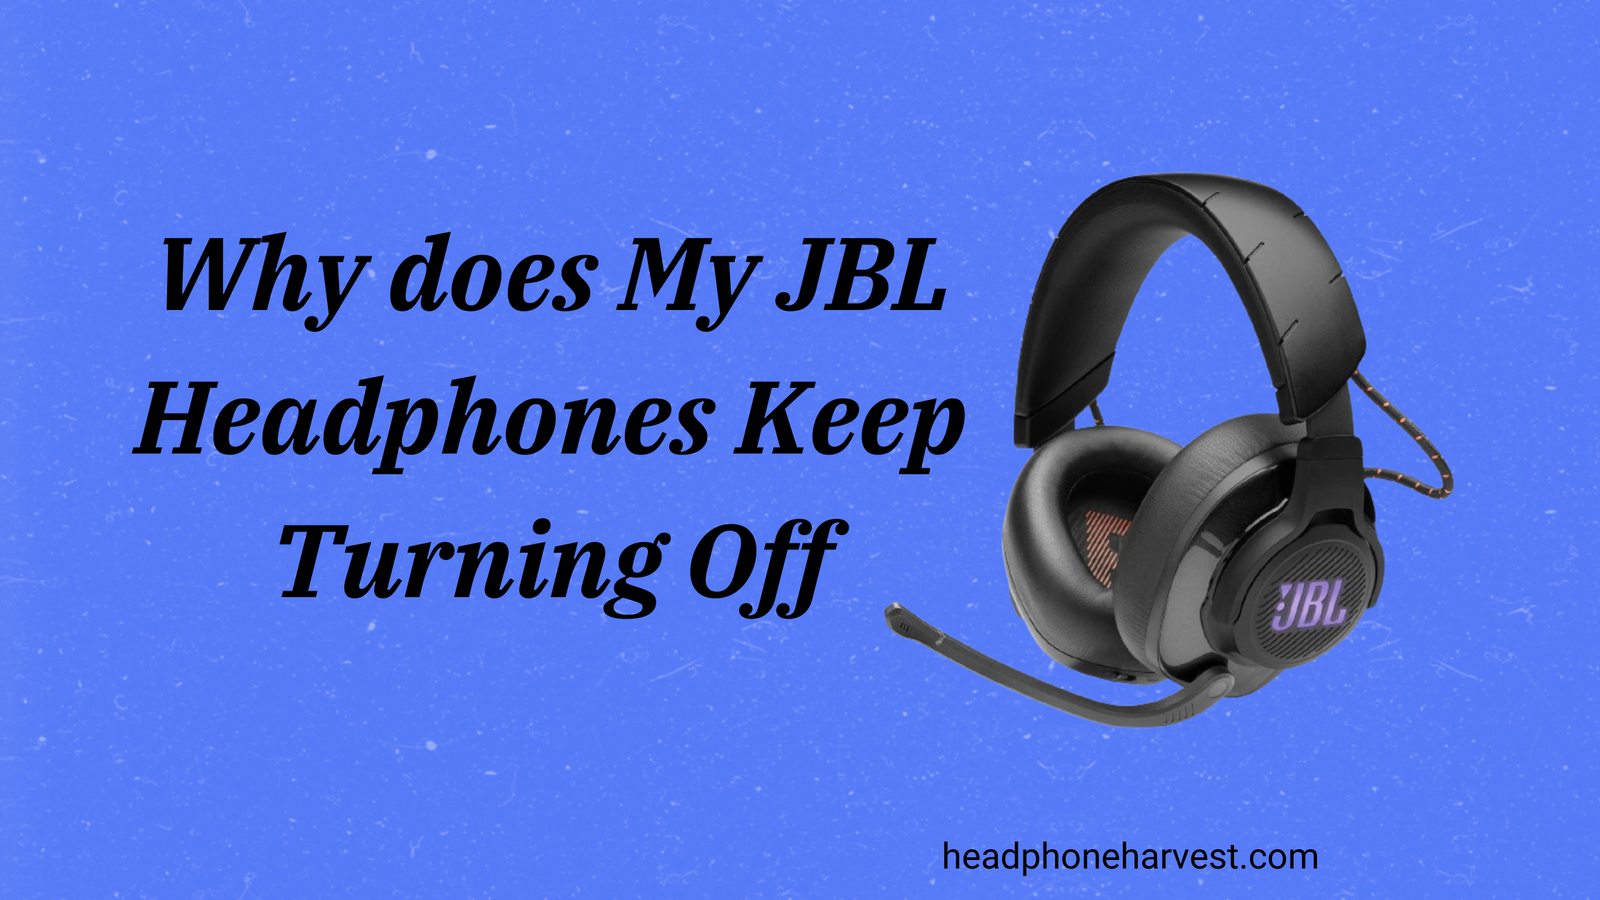 Why does My JBL Headphones Keep Turning Off